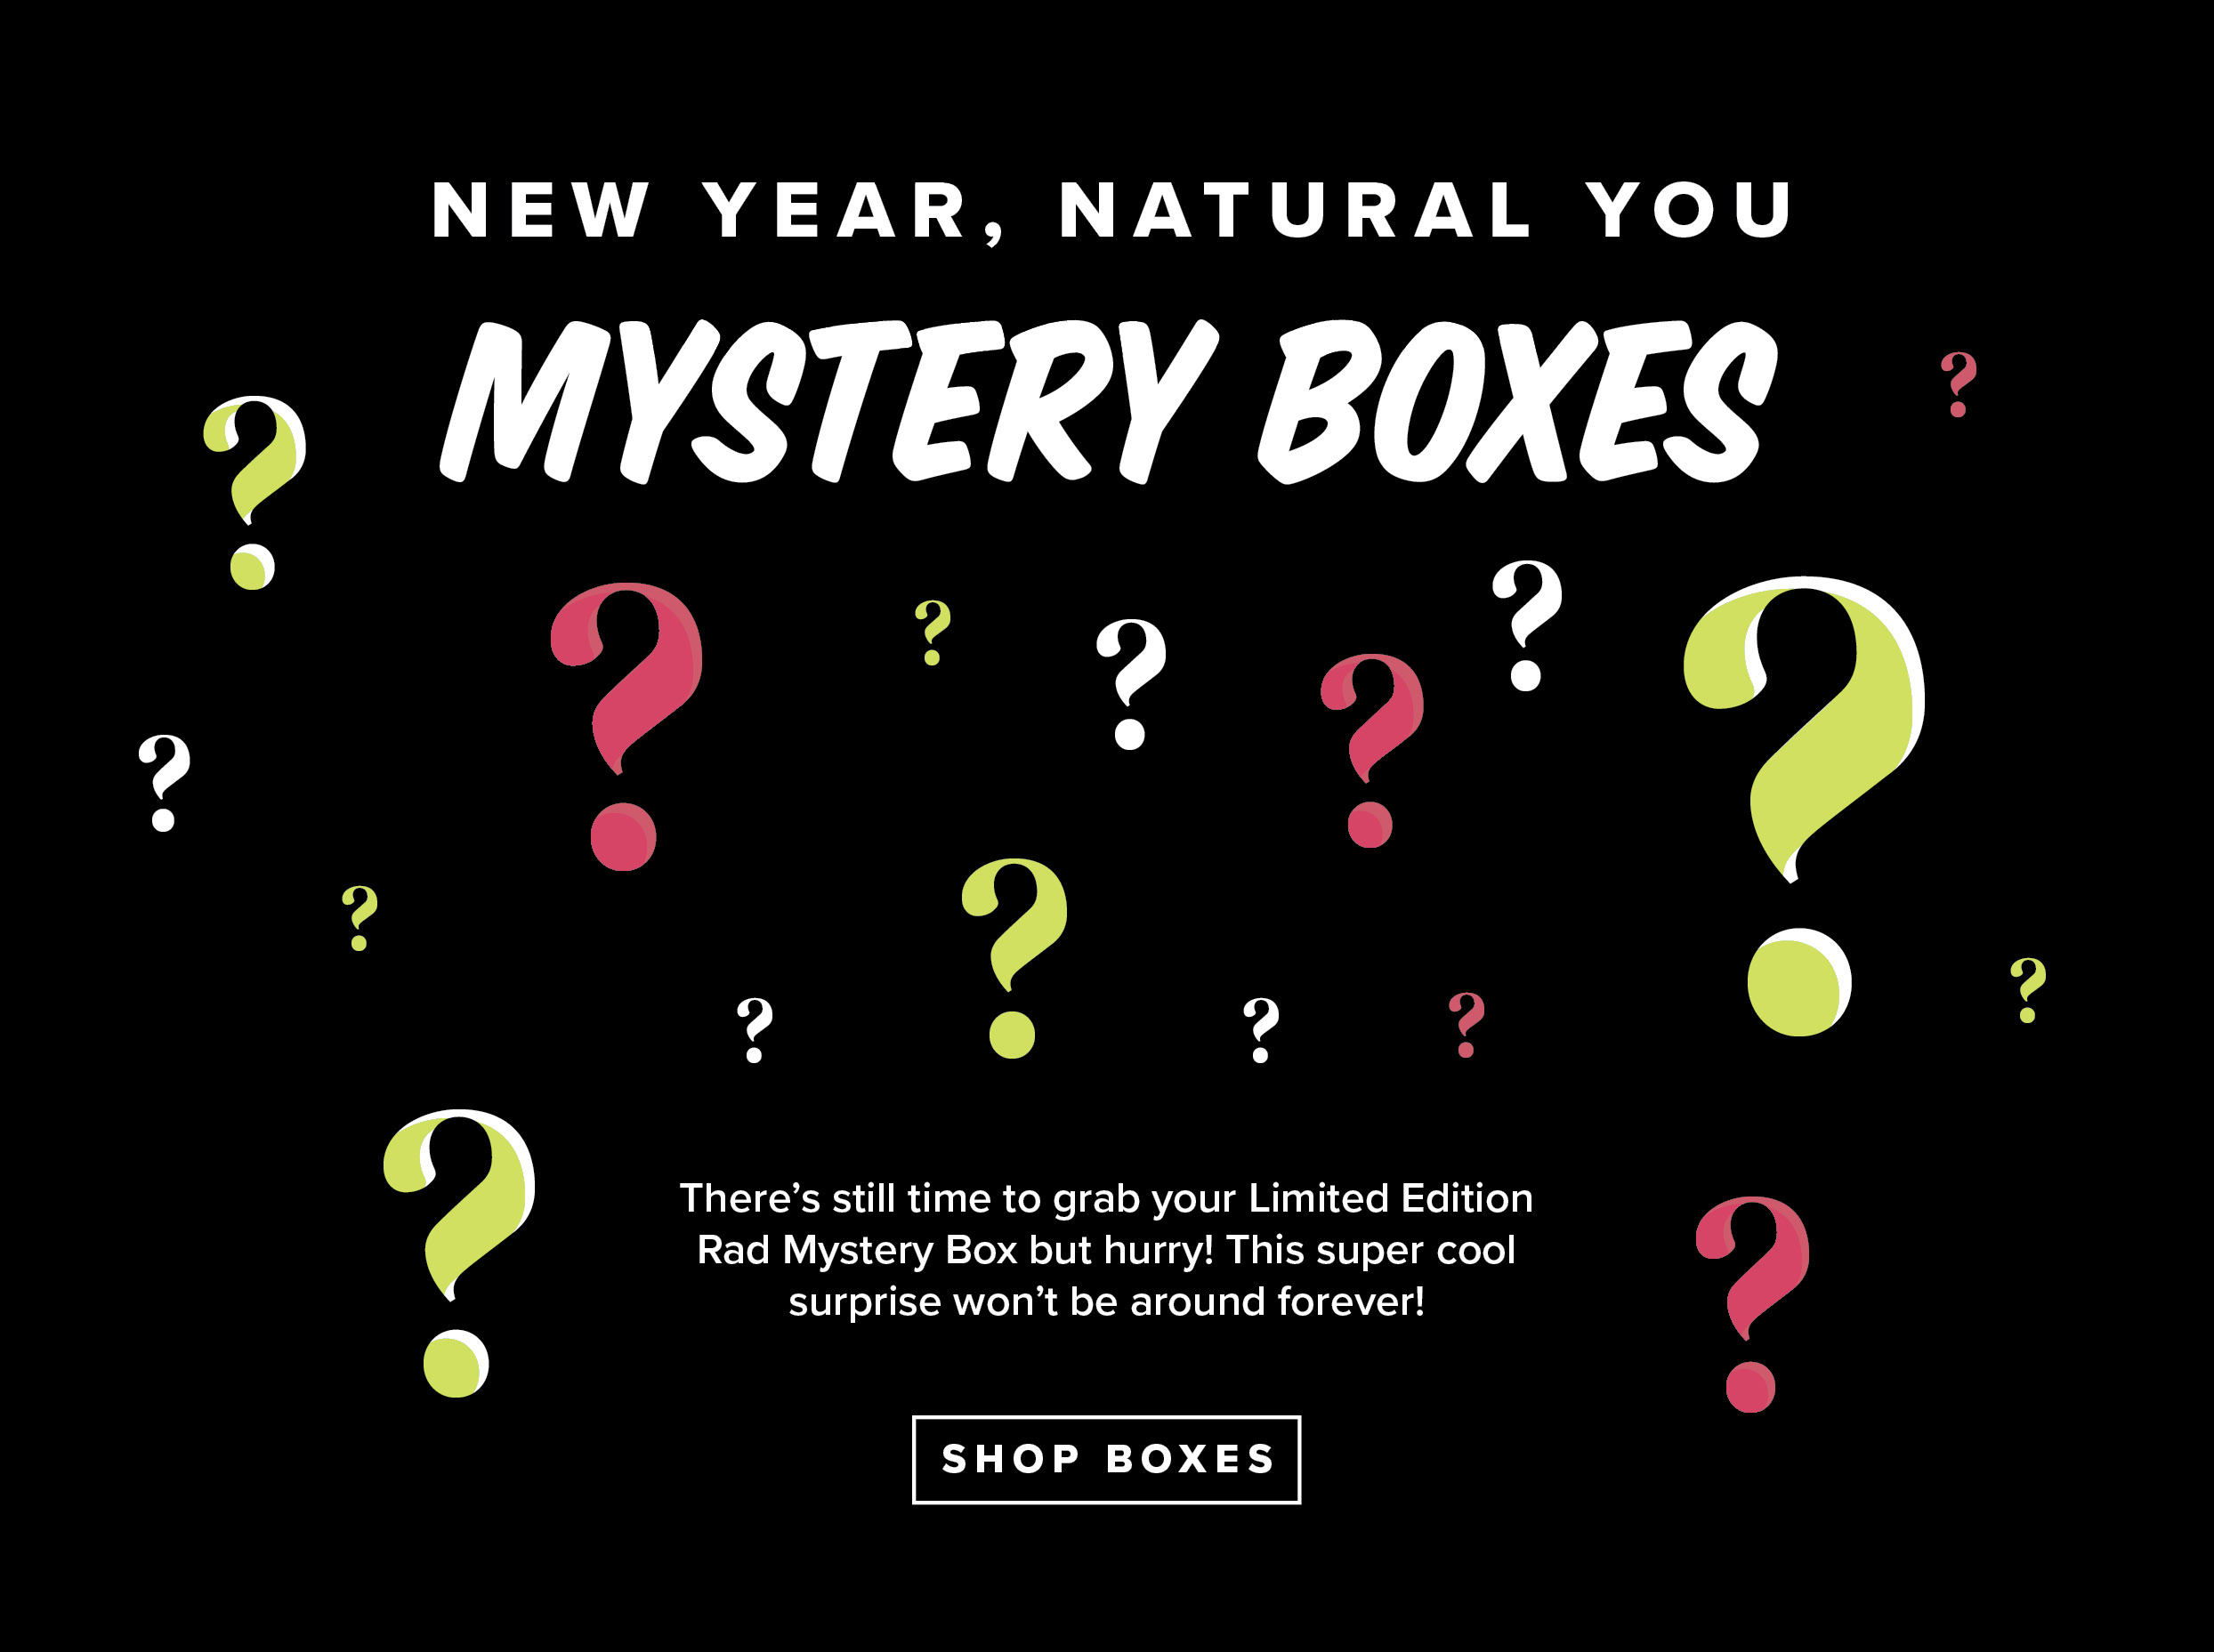 MysteryBoxes-Email 2nd Week.jpg